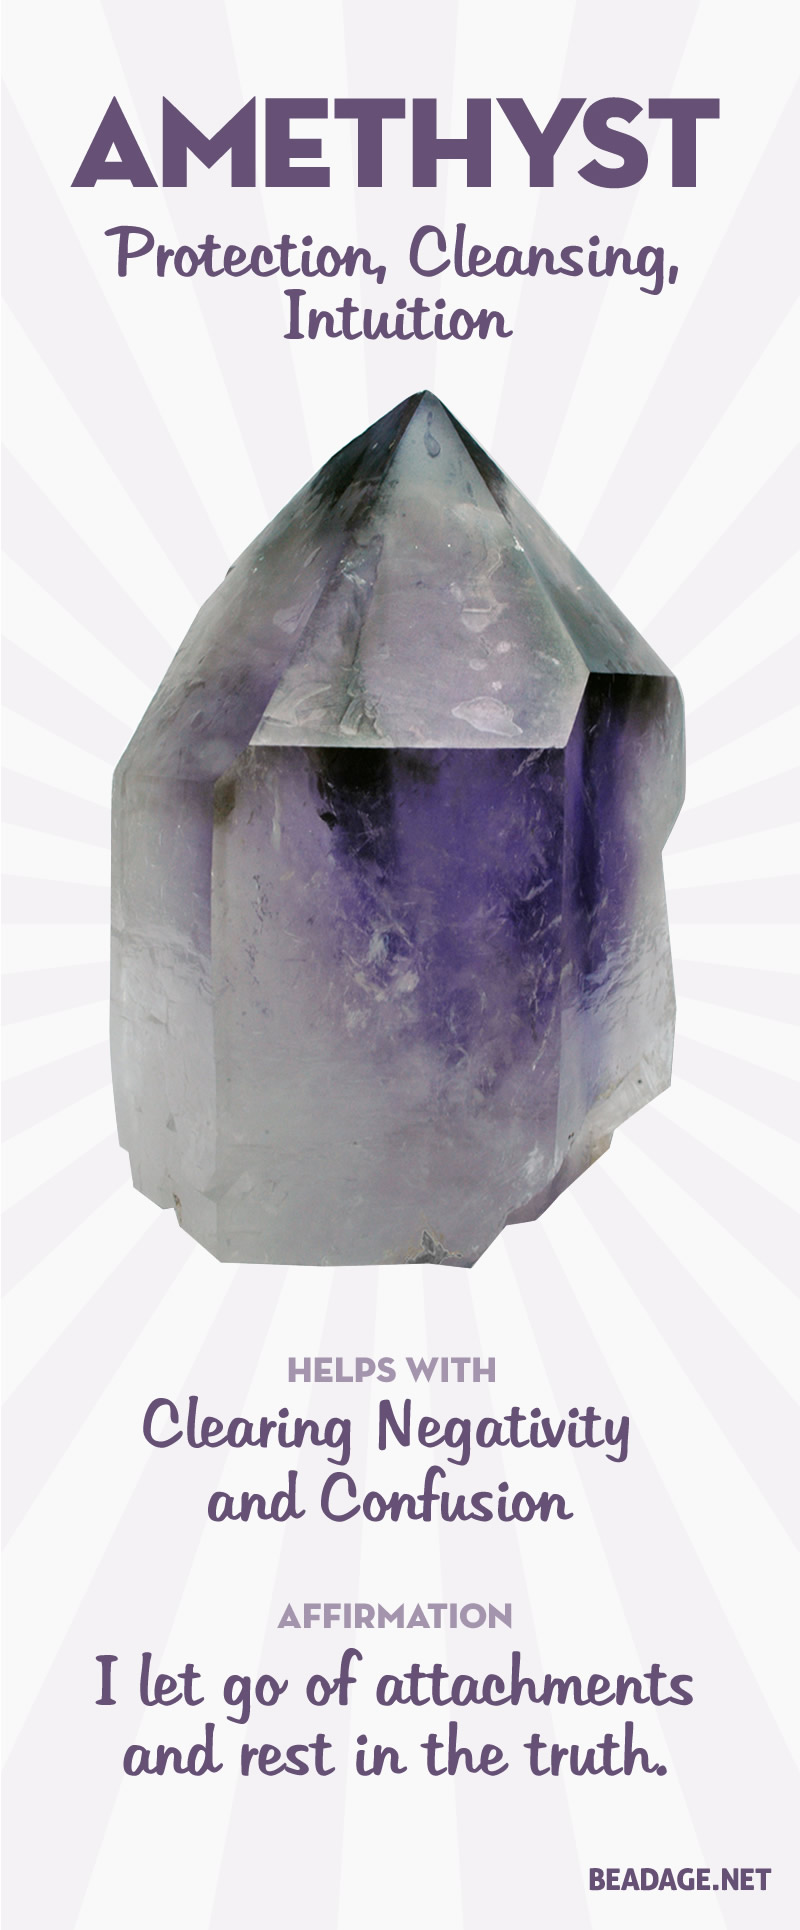 Amethyst is a powerhouse stone. It vibrates at a high frequency, creating a bubble of spiritual protection against negative energy. It awakens higher consciousness, assists in wise decision-making free of emotional confusion, and facilitates meditation and intuition. Learn more about Amethyst meaning + healing properties, benefits & more. Visit to find gemstone meanings & info about crystal healing. #gemstones #crystals #crystalhealing #beadage